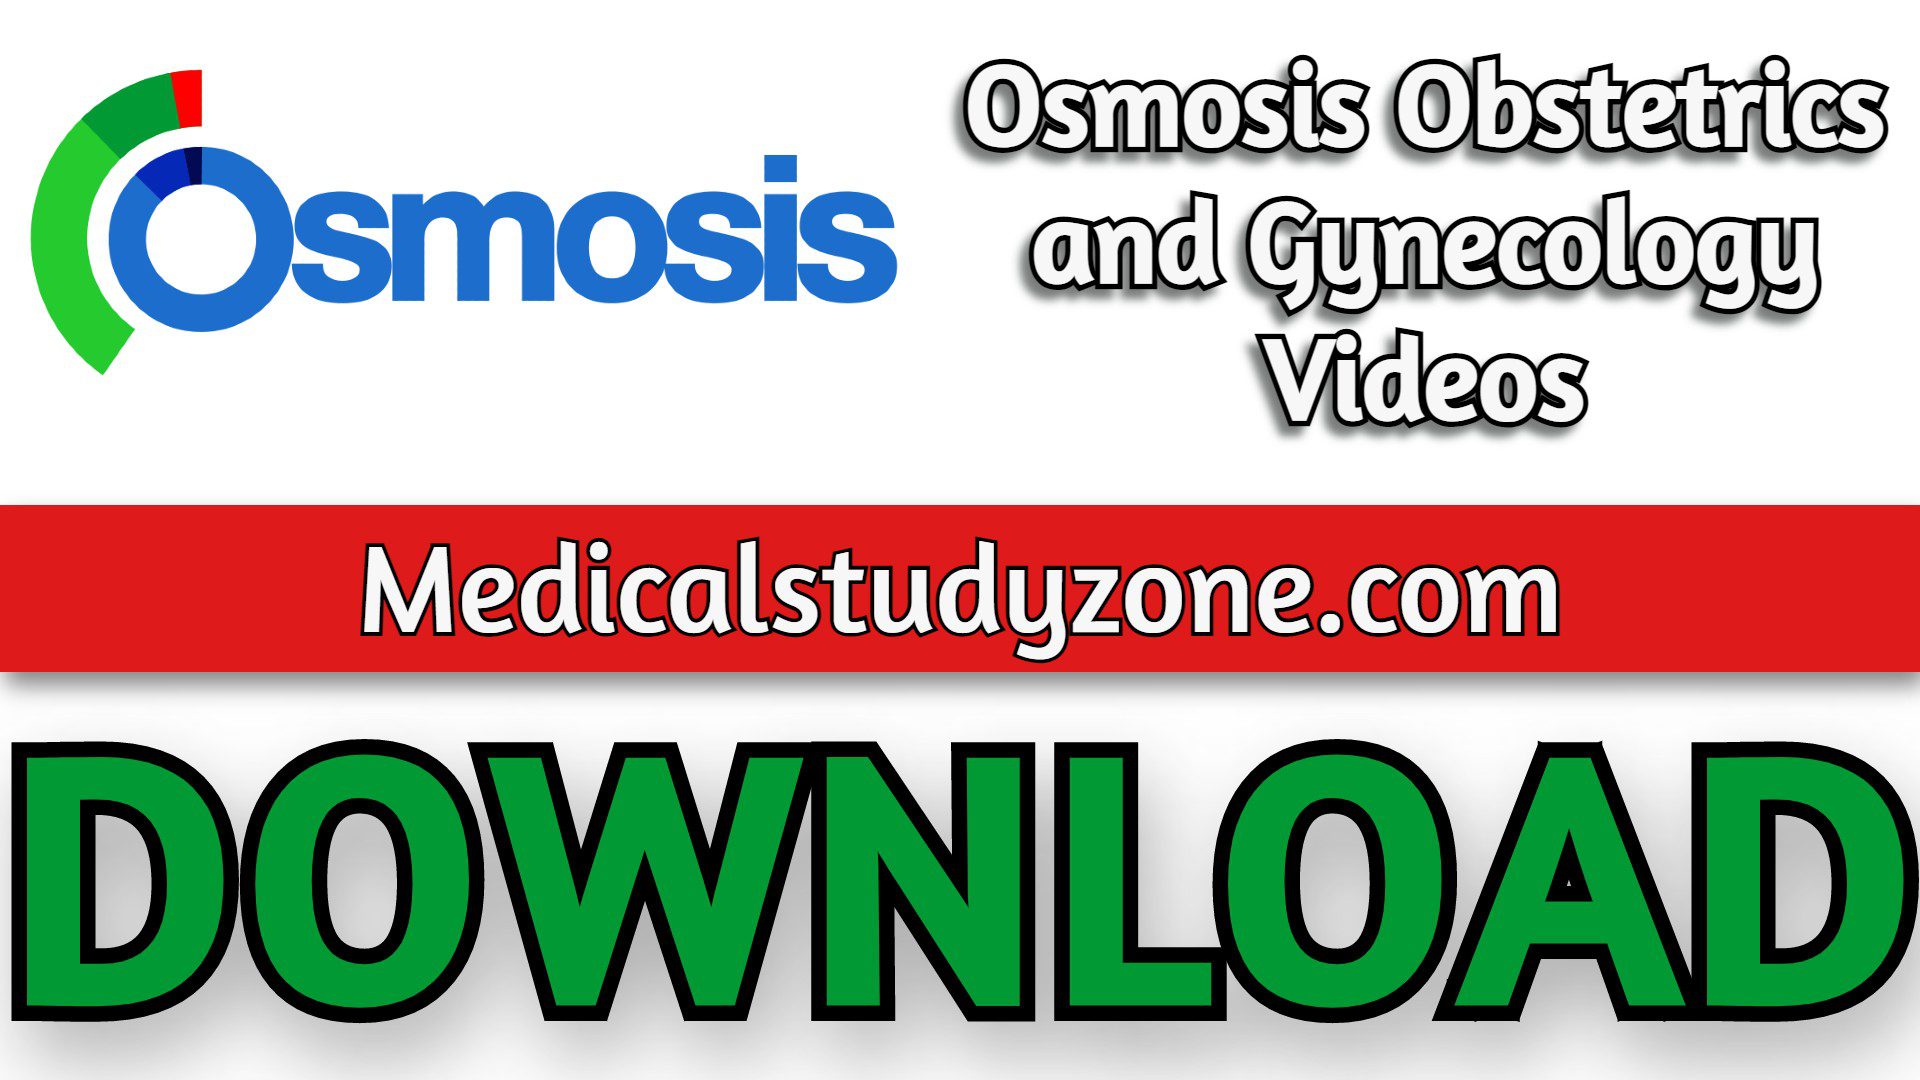 Osmosis Obstetrics and Gynecology Videos 2022 Free Download